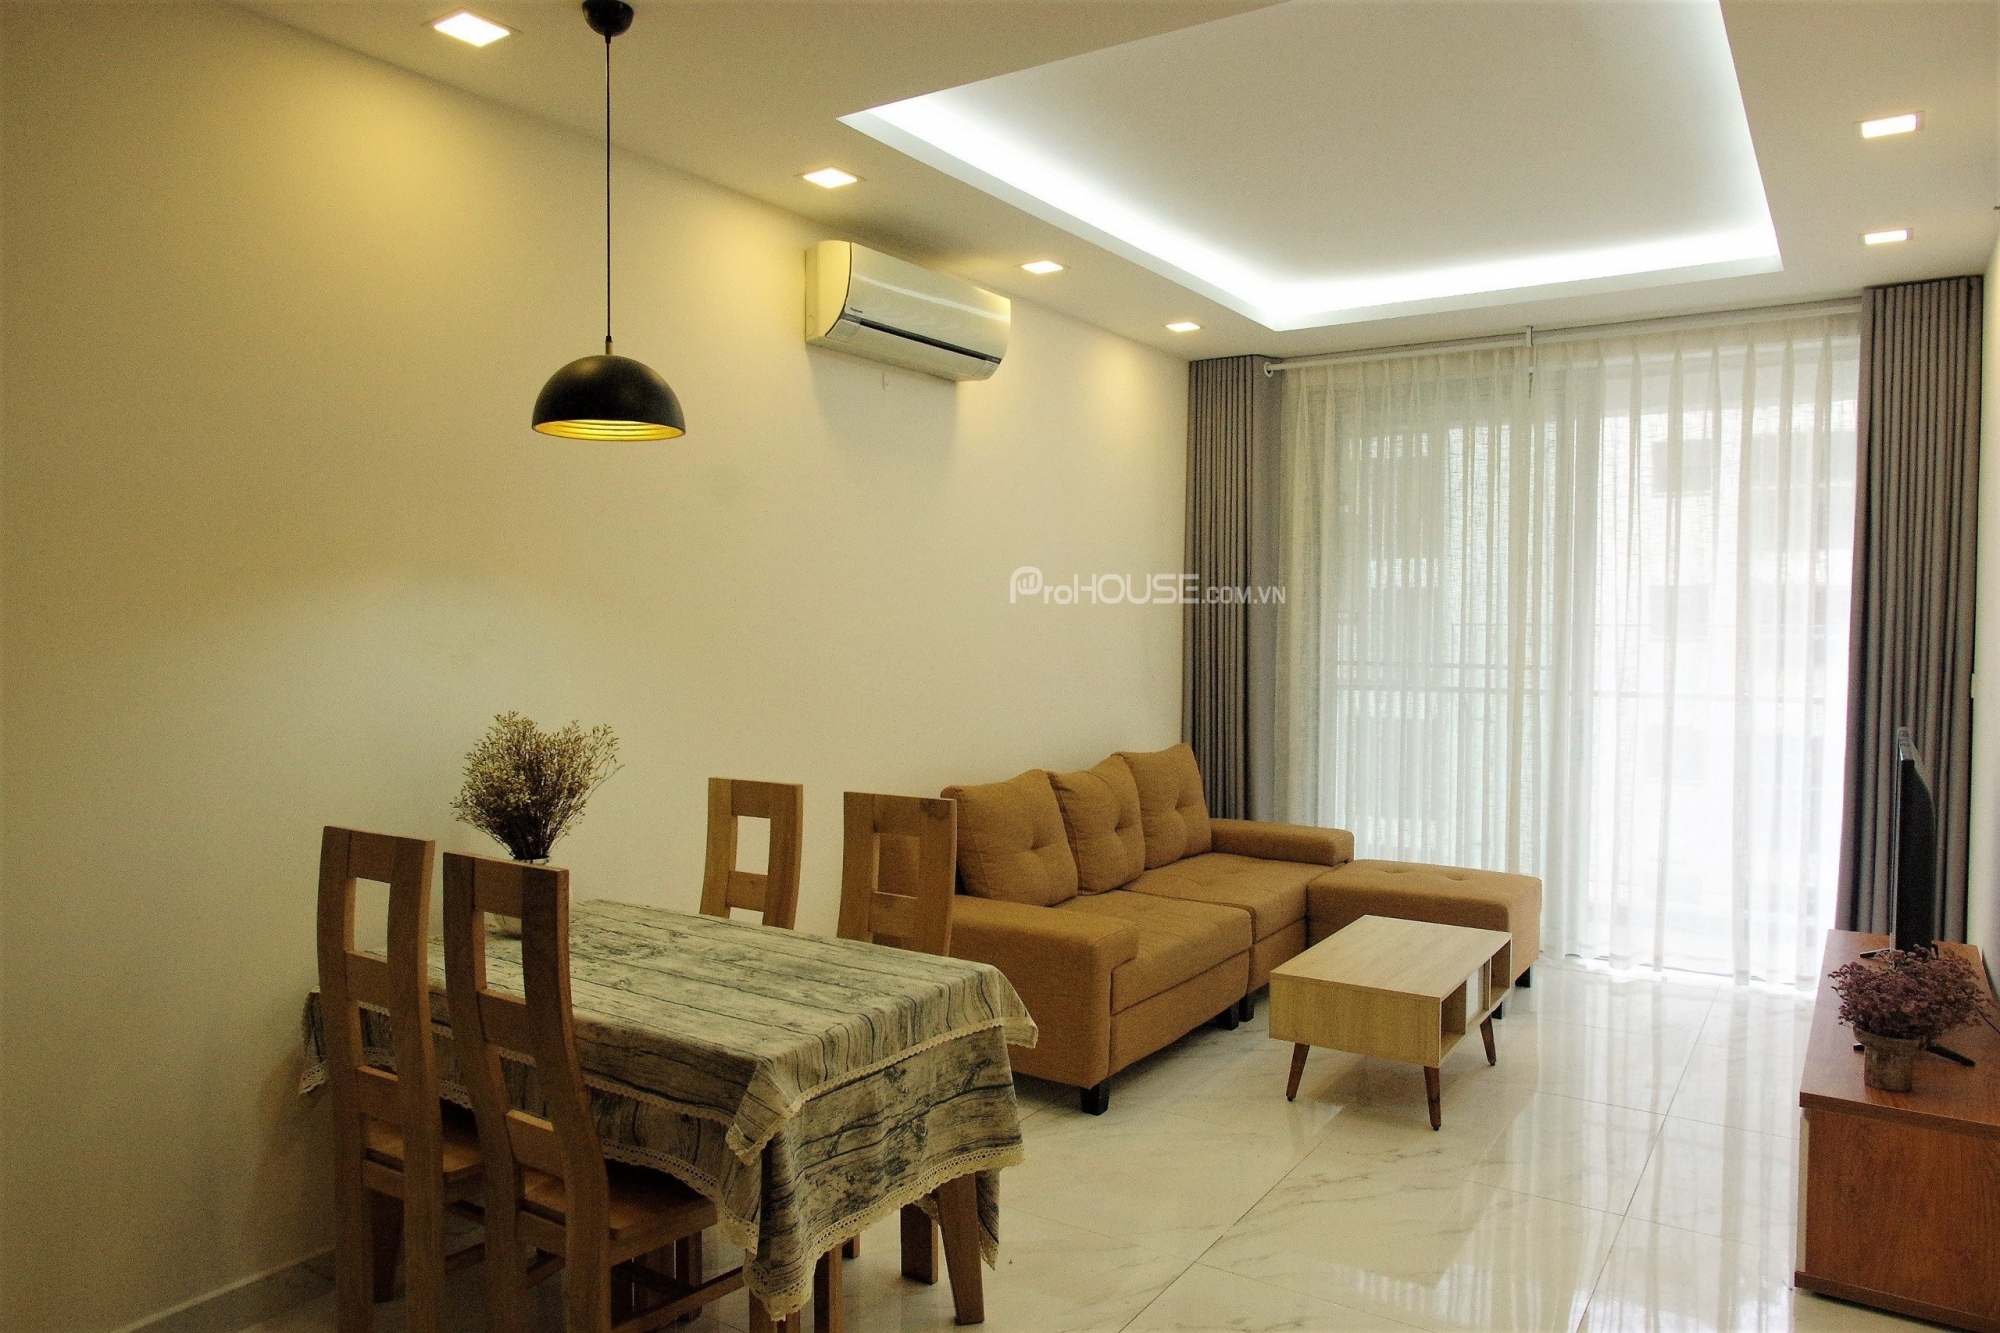 1 bedroom apartment for rent with full furniture in Midtown Phu My Hung